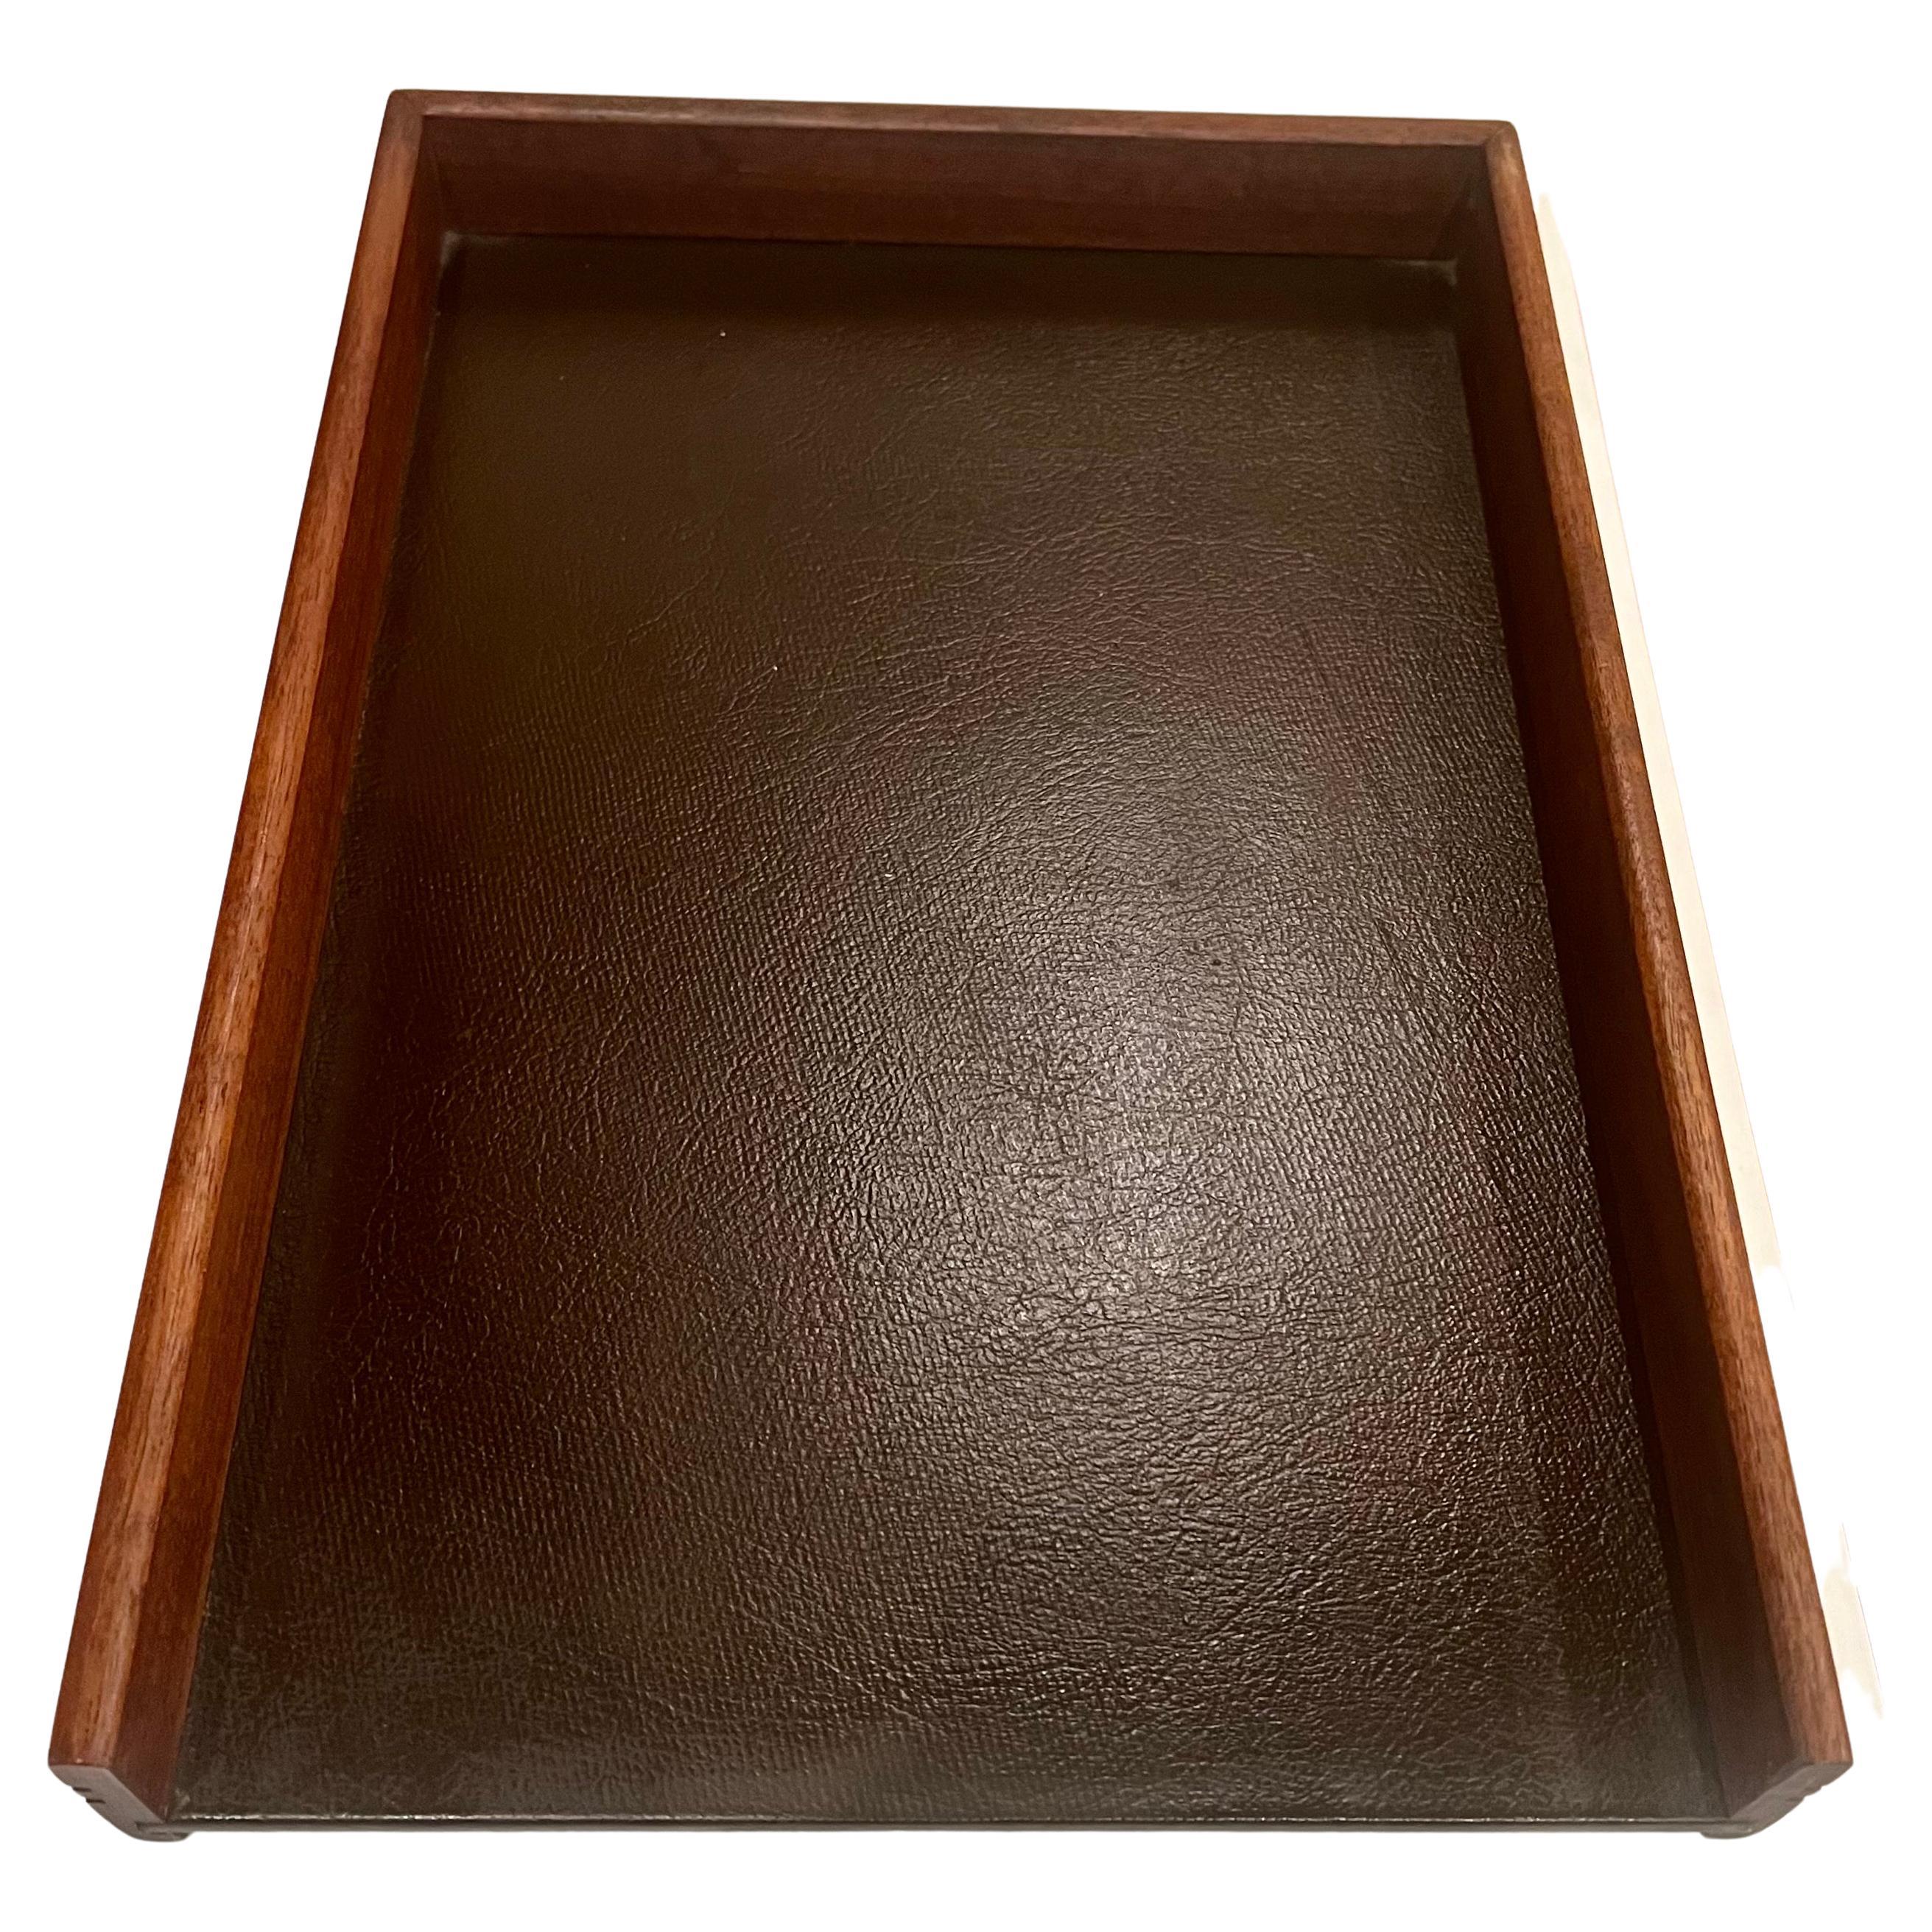 Single letter desk tray with solid walnut walls and Naugahyde brown insert, circa 1970s freshly refinished, Very nice accent to any executives desk! California design.